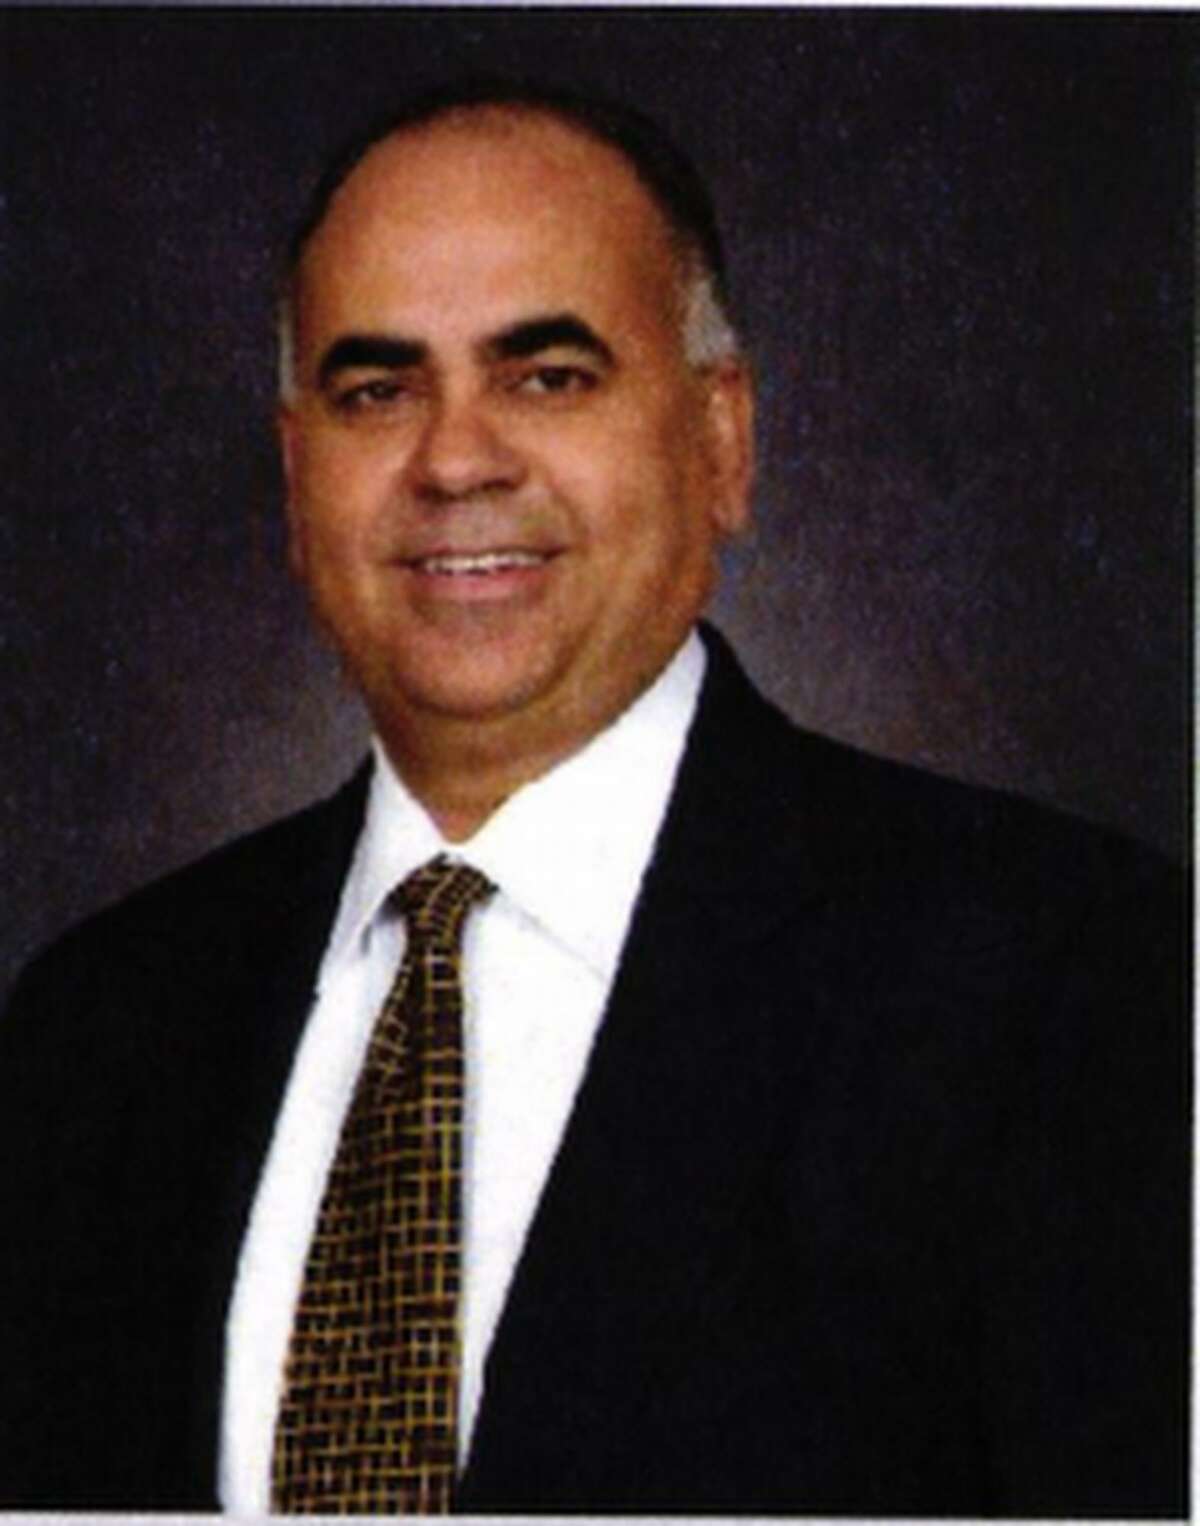 The Office of the Comptroller of the Currency recently imposed a $250,000 civil penalty against Saul Ortega, the former chairman, CEO, president and CFO of First National Bank of Edinburg over its “unsafe and unsound practices.” The bank was shut down by regulators in 2013. Ortega is pictured in a Texas National Bank annual report that was filed with the Federal Reserve Bank of Dallas.